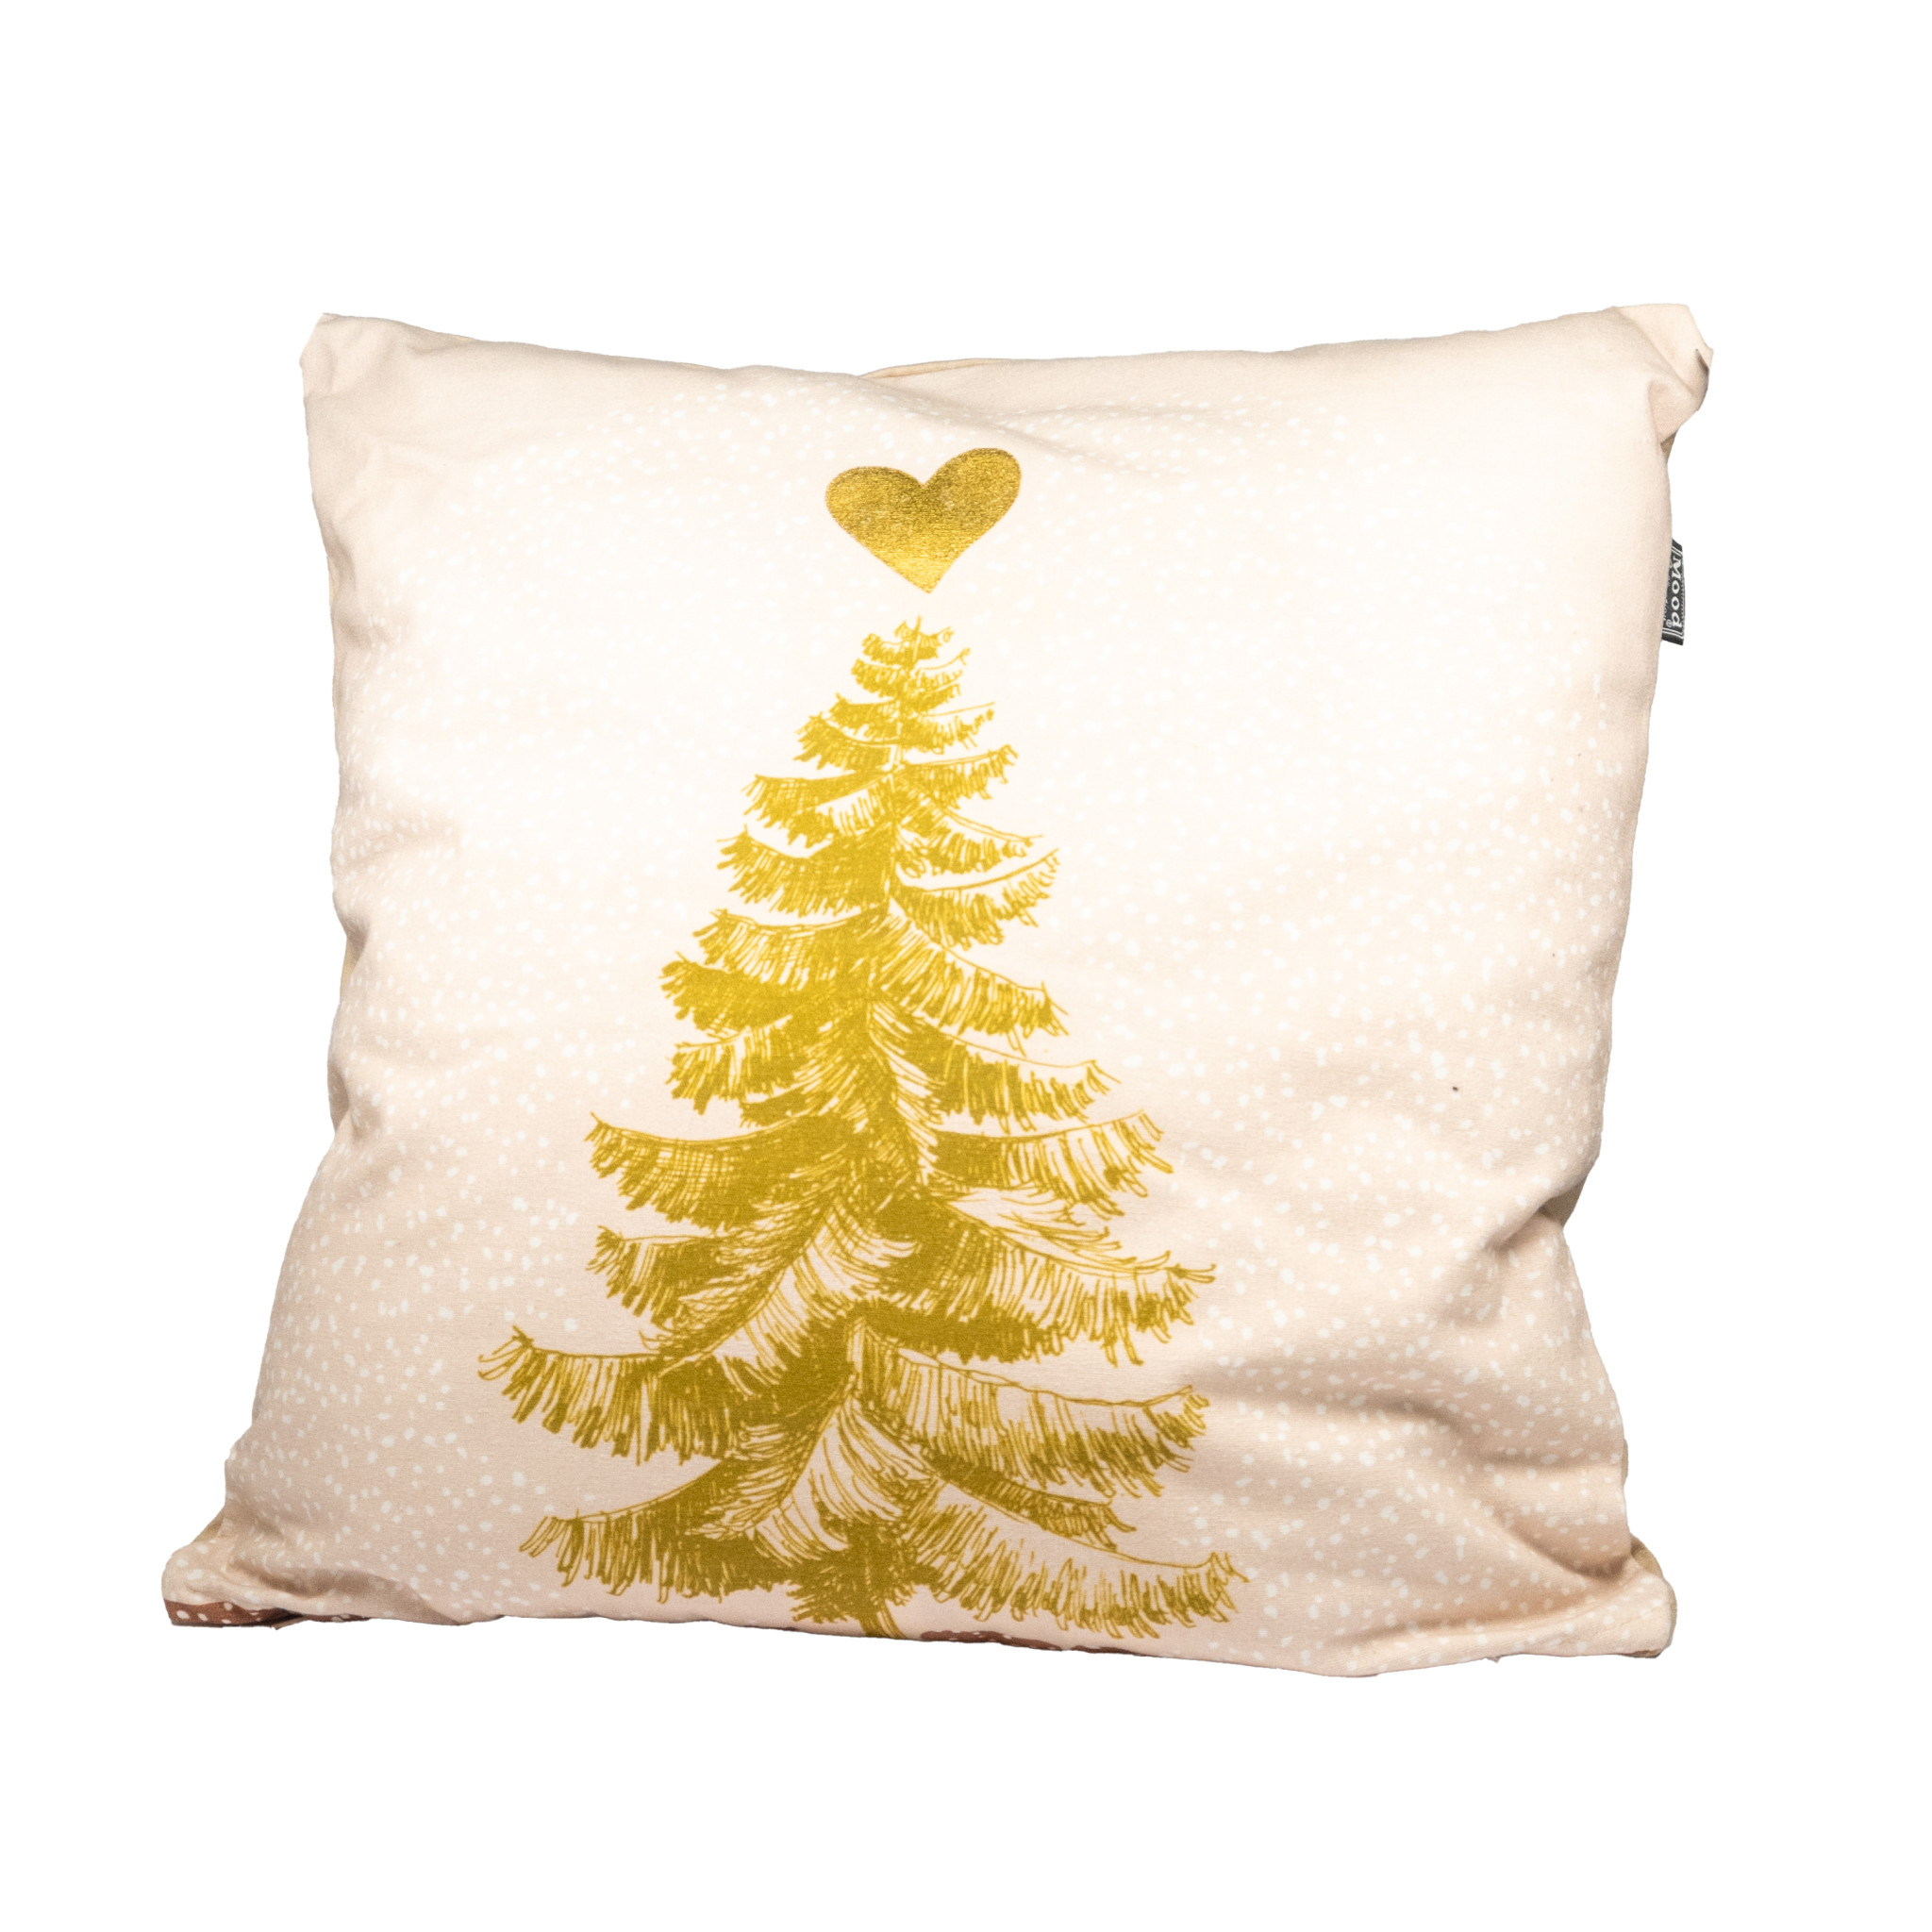 Cushion Evergreen Tree with Heart Topper - Beige - 45cm x 45cm